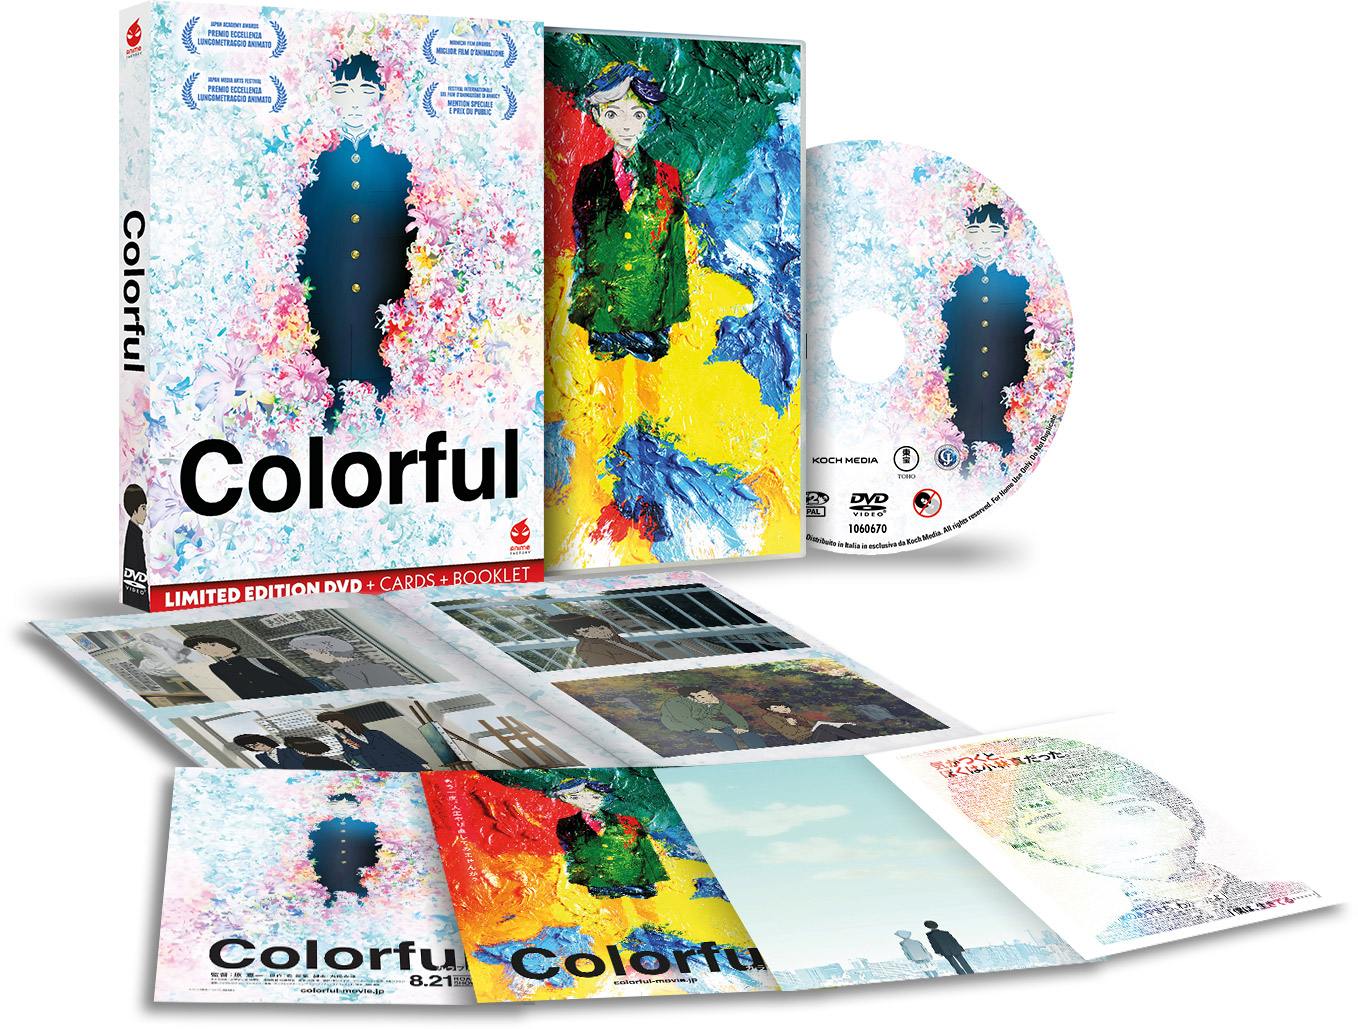 Colorful in DVD